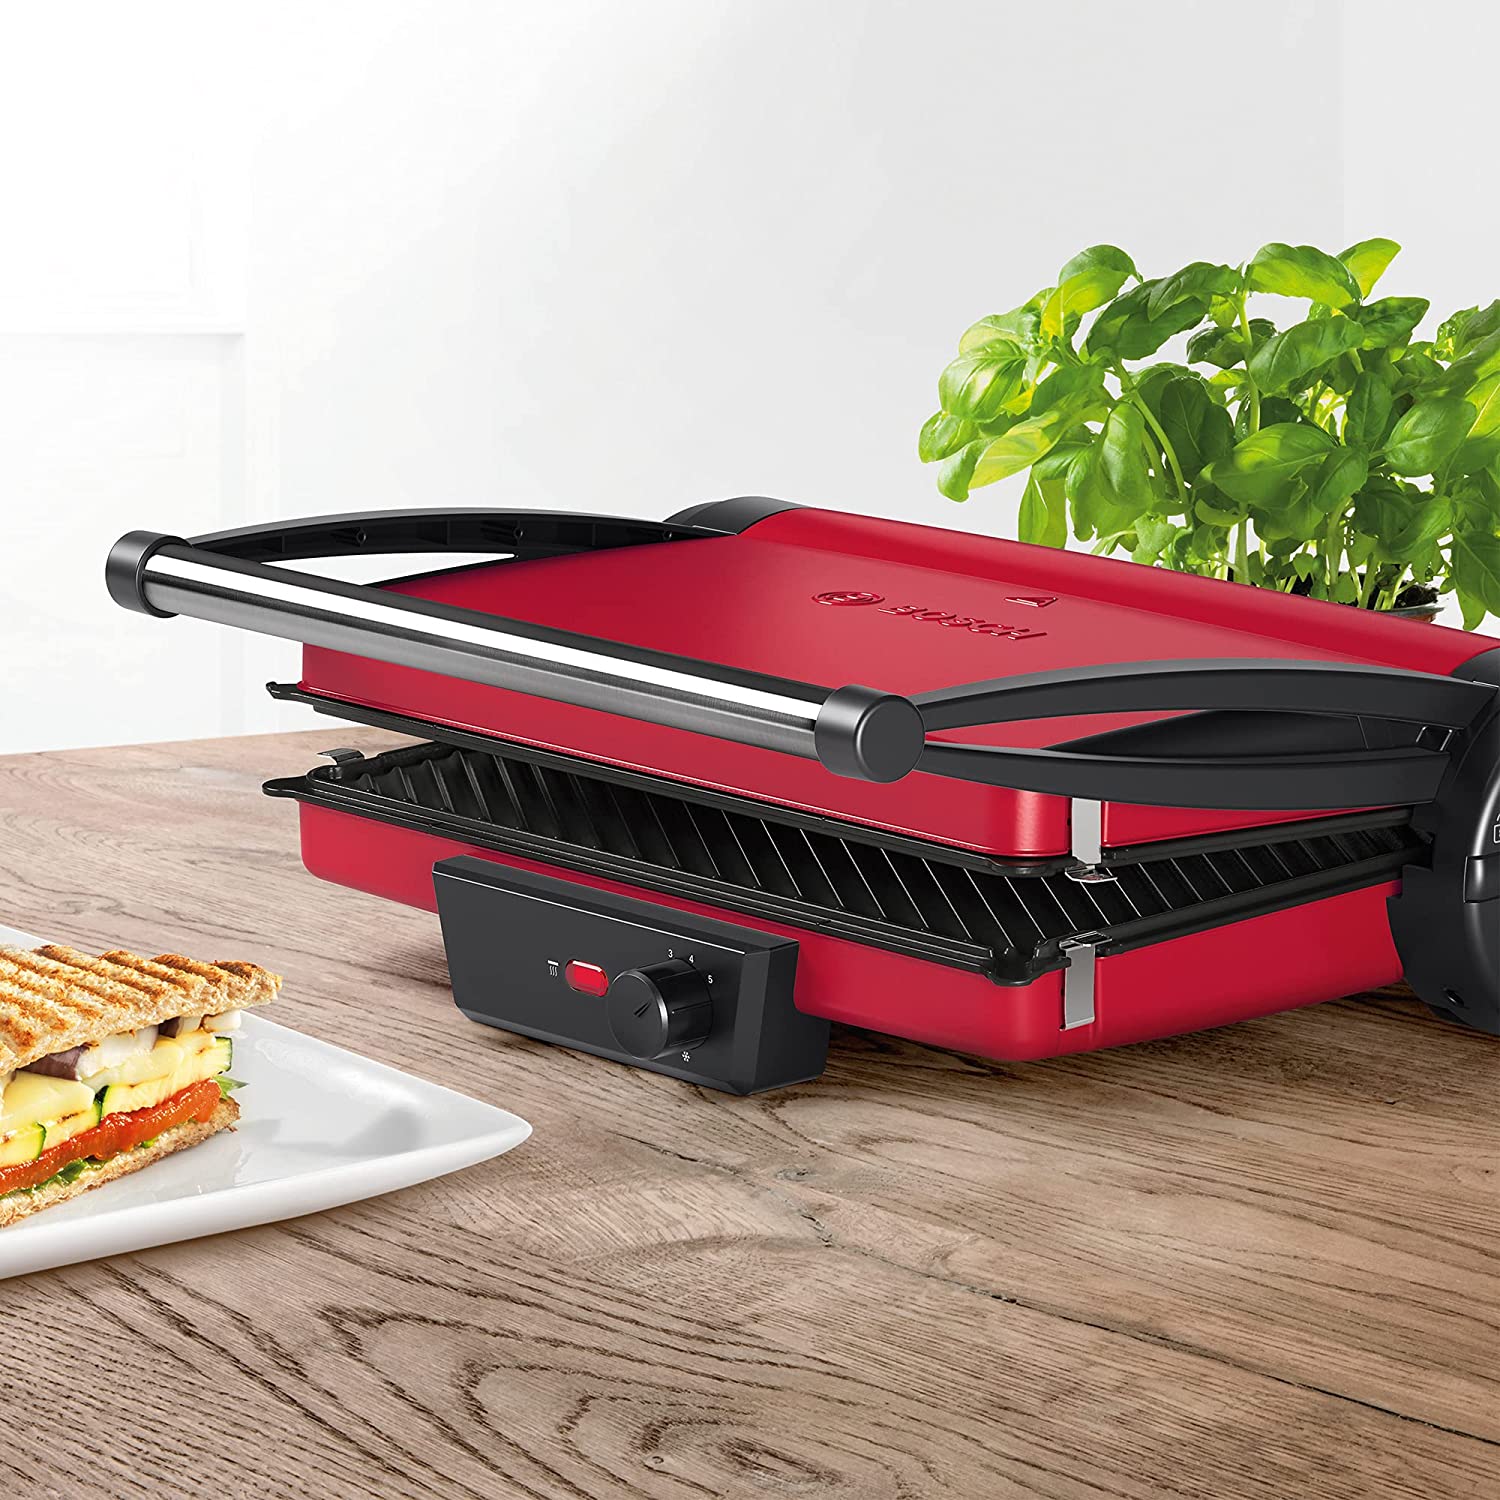 Bosch Grill Pan, 2000W (Red)